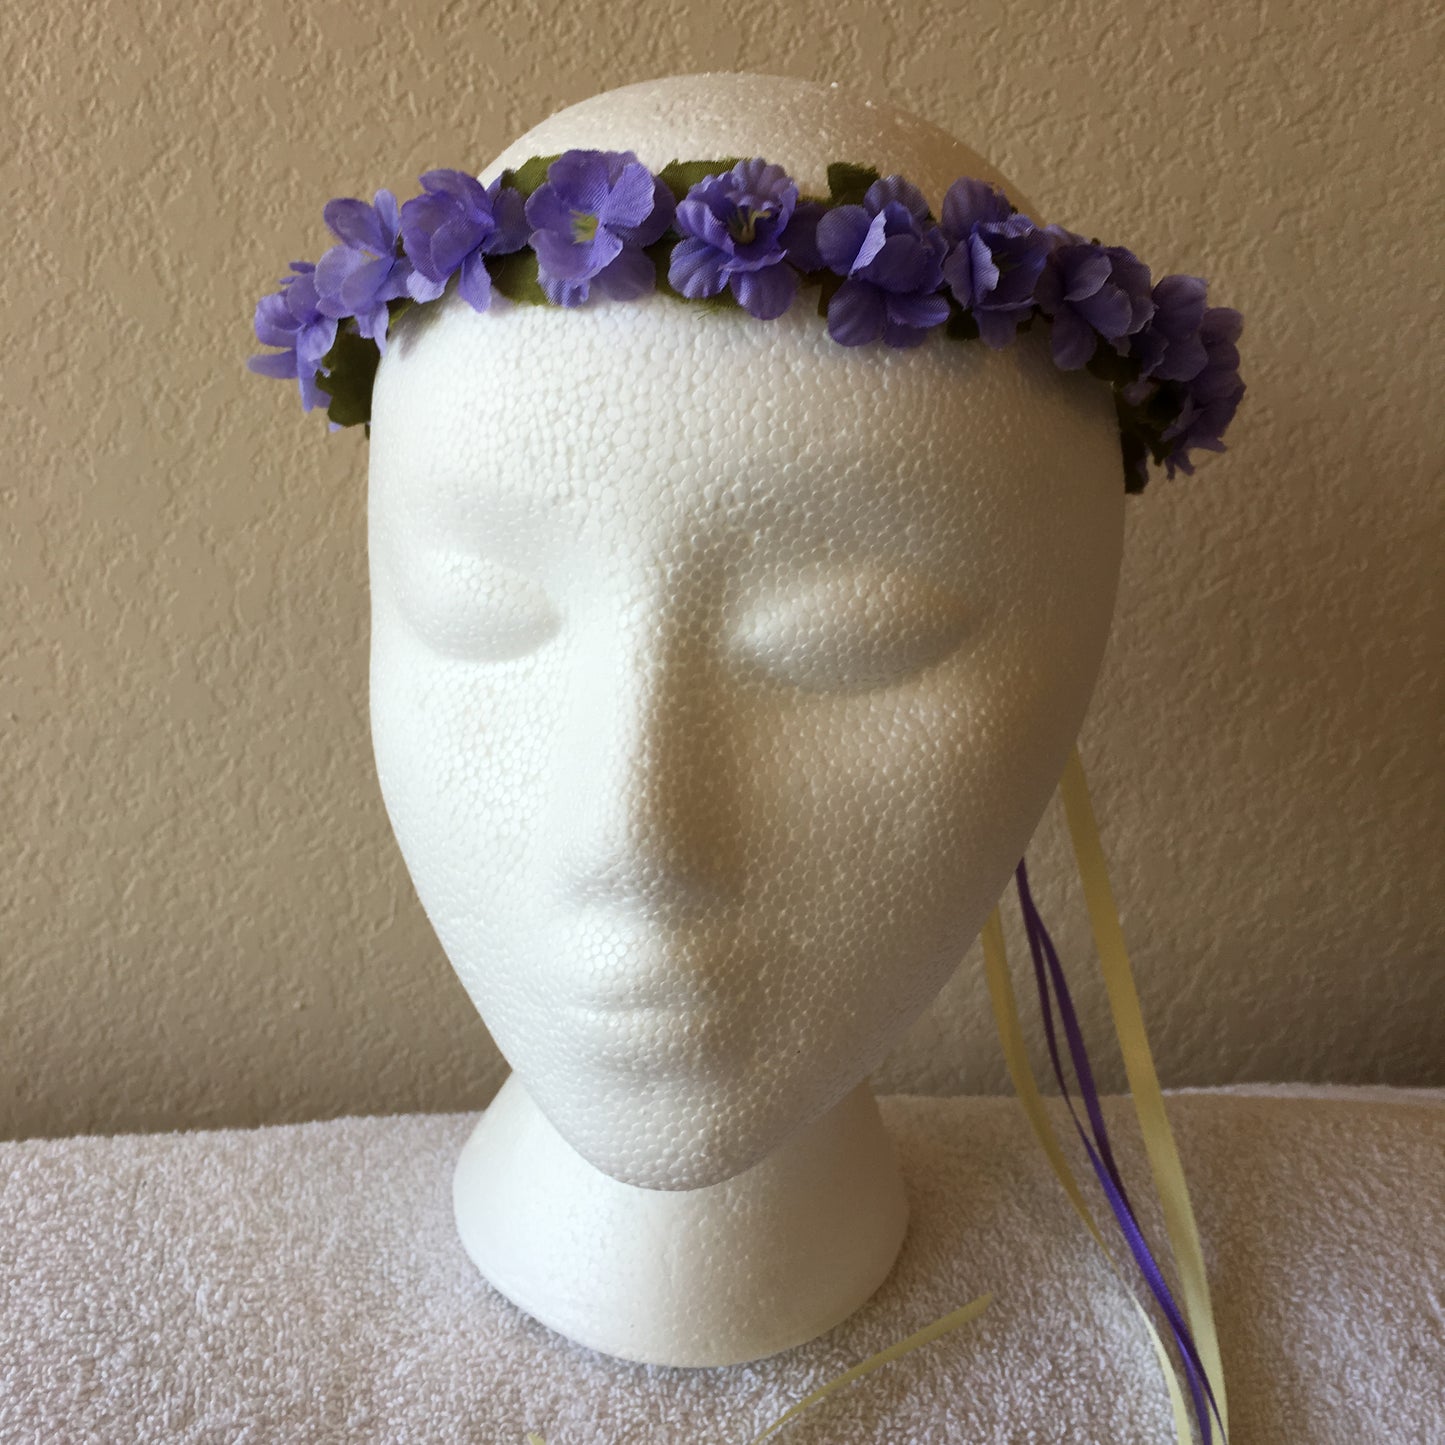 Extra Small Wreath - Small purple flowers